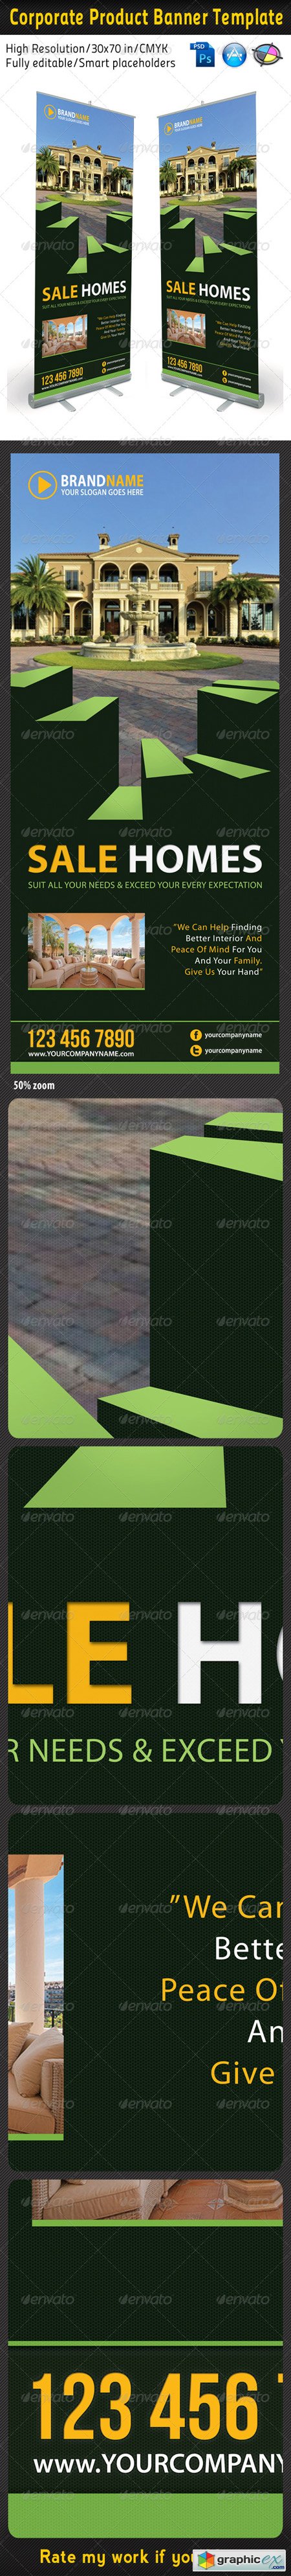 Real Estate Banner Template 03